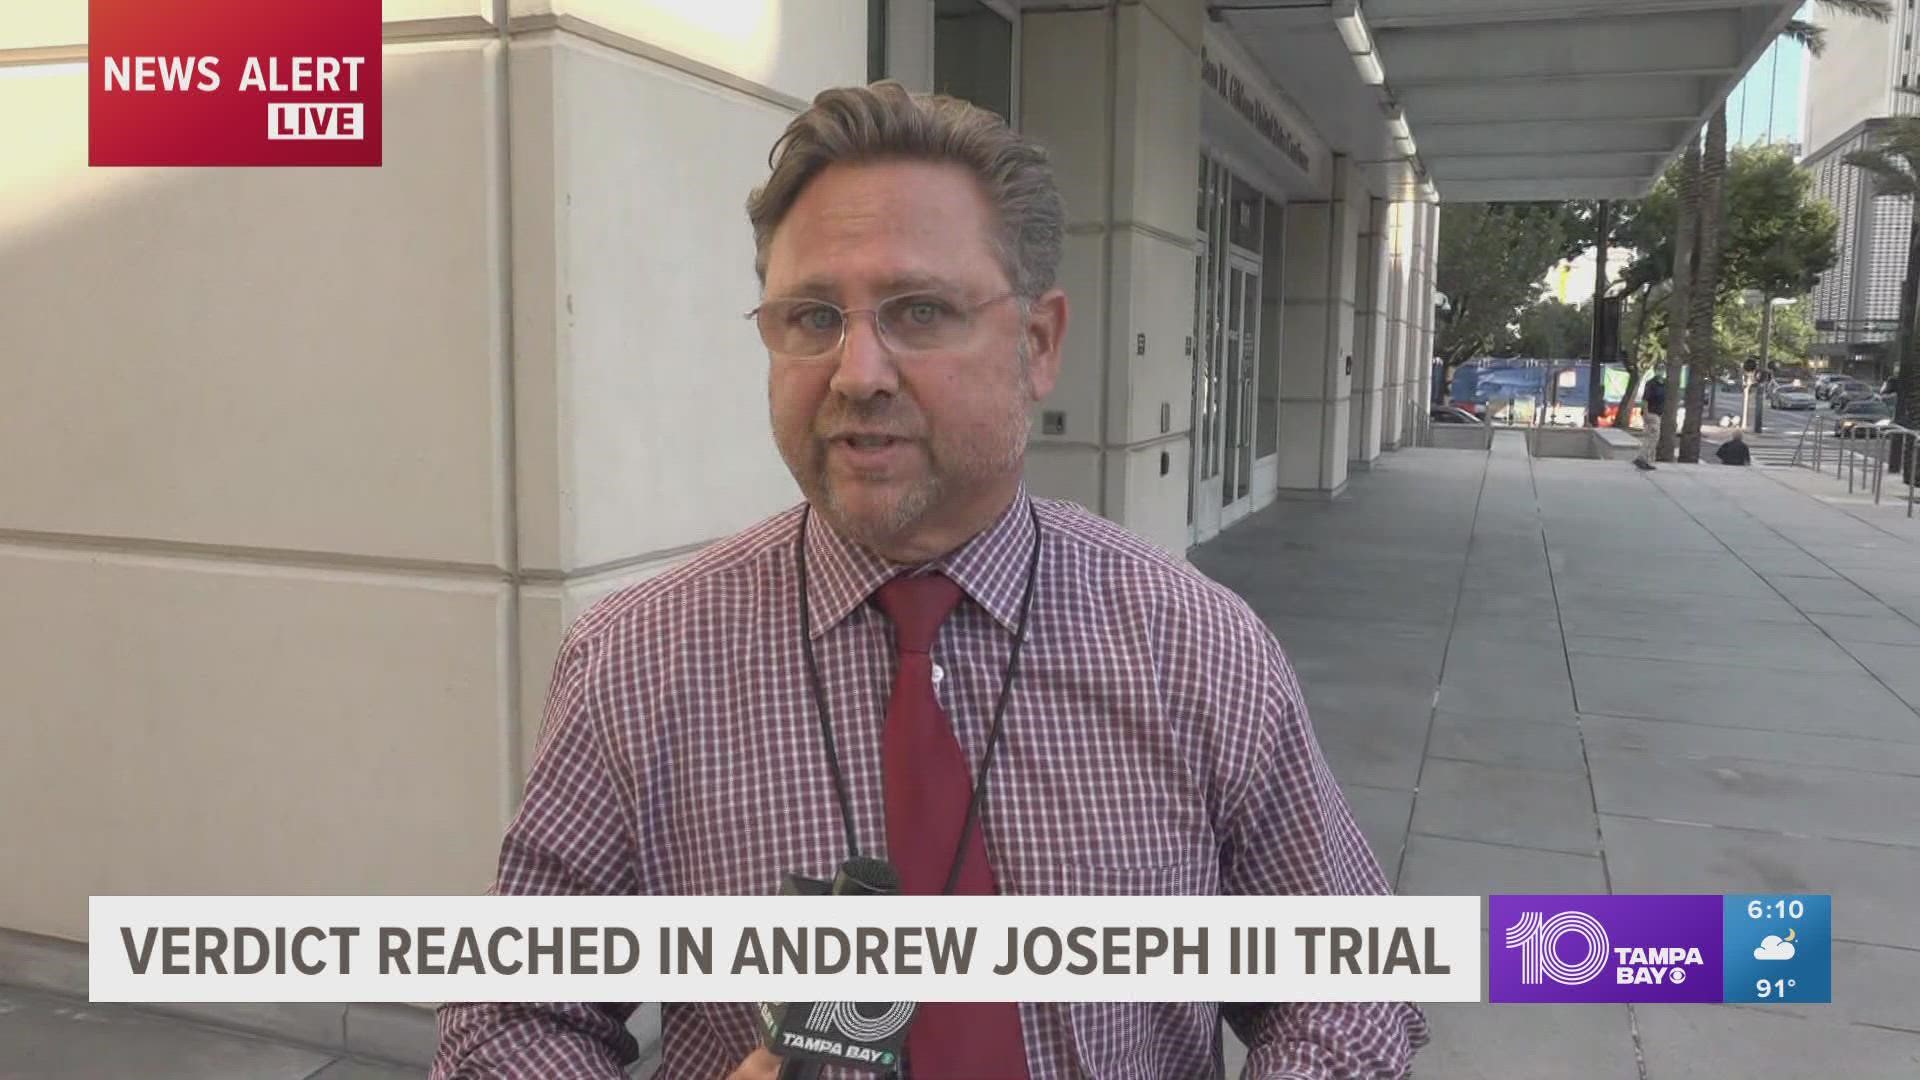 Andrew Joseph III's parents are set to receive $13.5 million following the lawsuit.